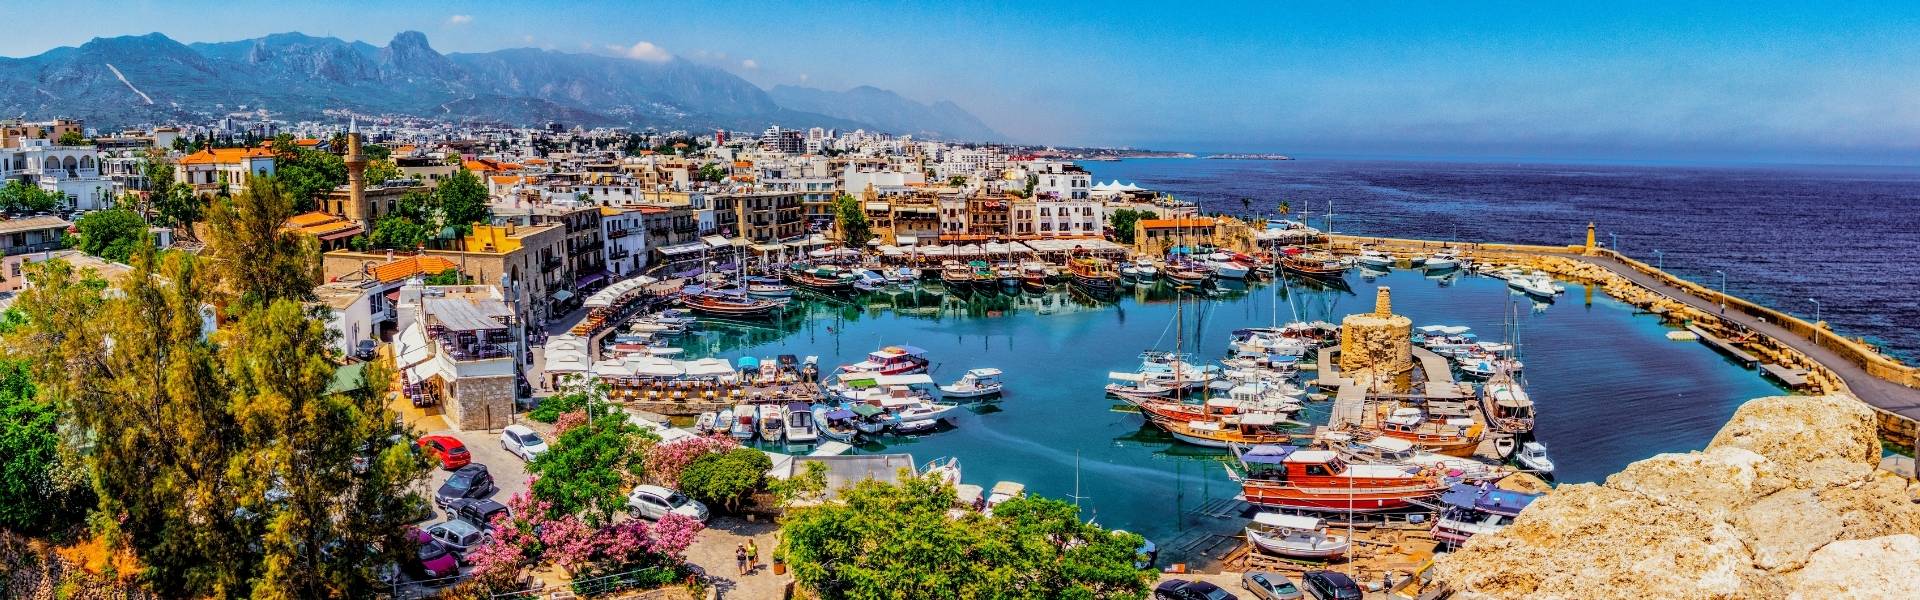 Internship Opportunities in Cyprus in 2022: Multiple Options